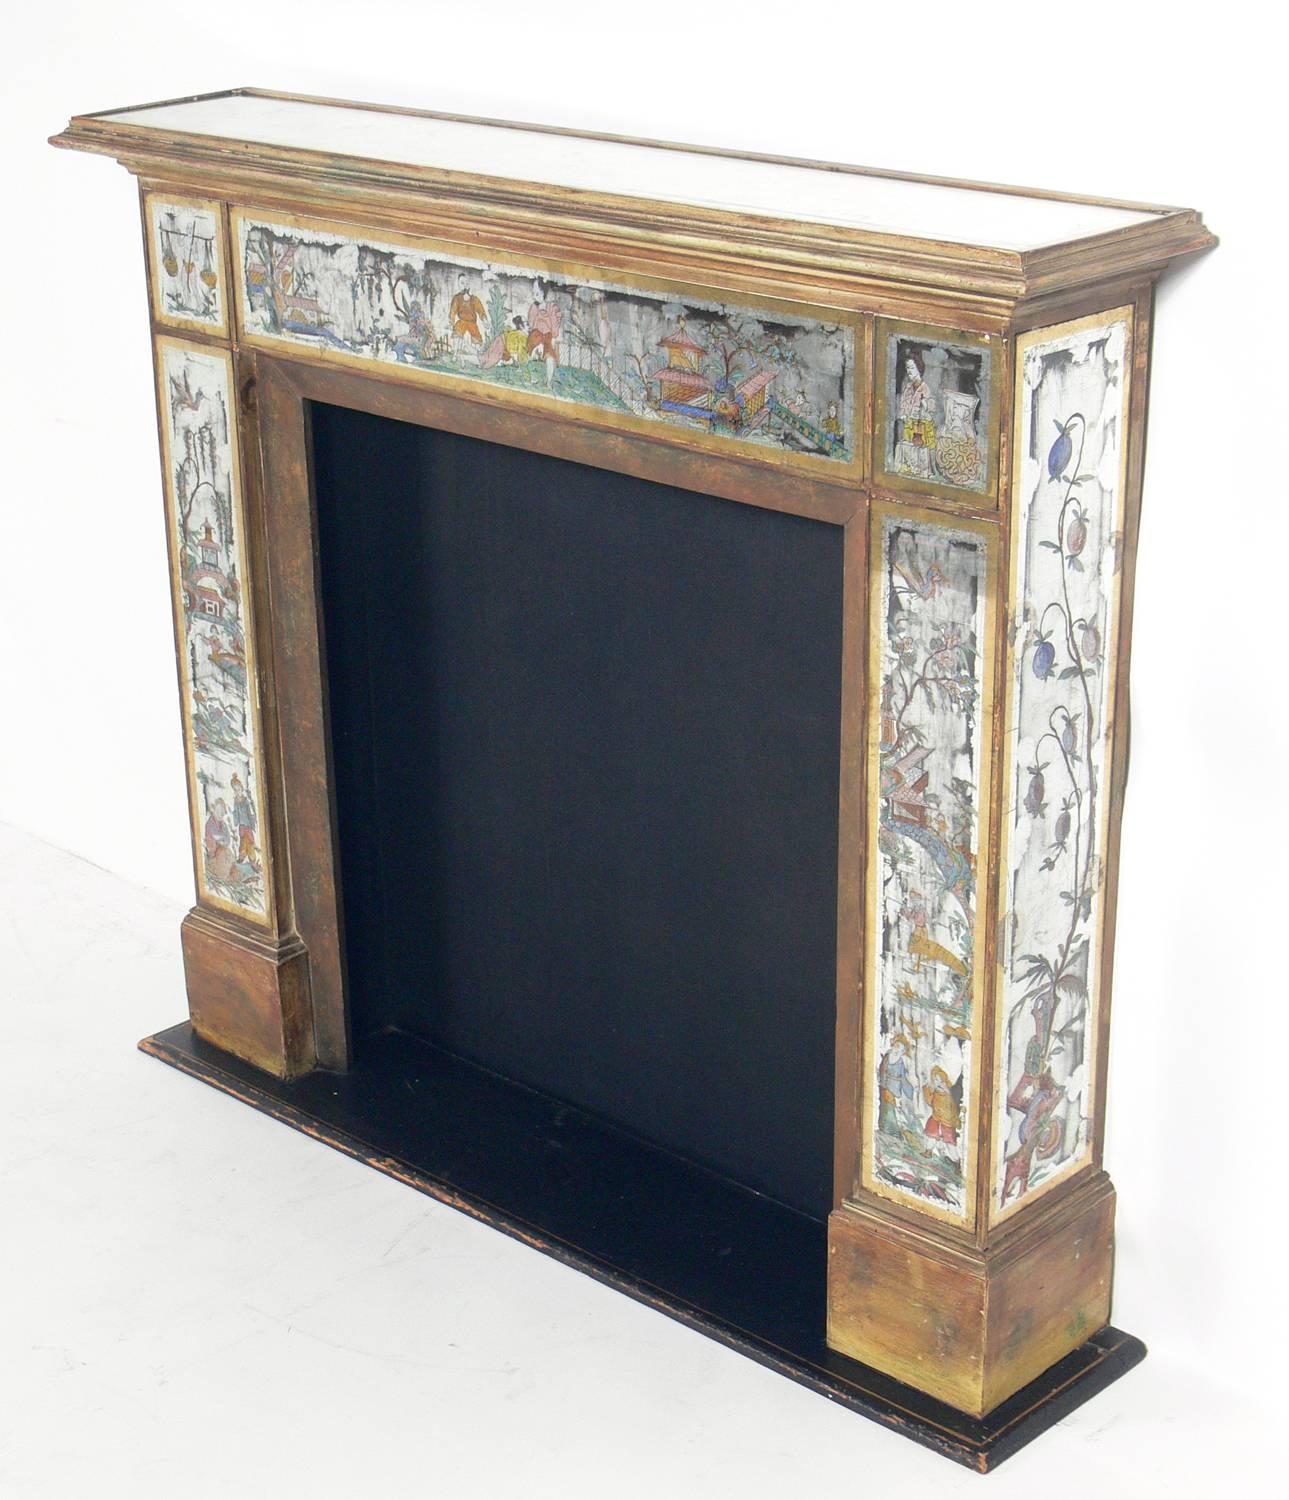 Hollywood Regency mirrored fireplace mantel with Asian églomisé Decoration, American, circa 1930s. This piece retains it's wonderful original patina to both the mirrored surfaces and the gilt woodwork. It was originally used with fake logs, but the